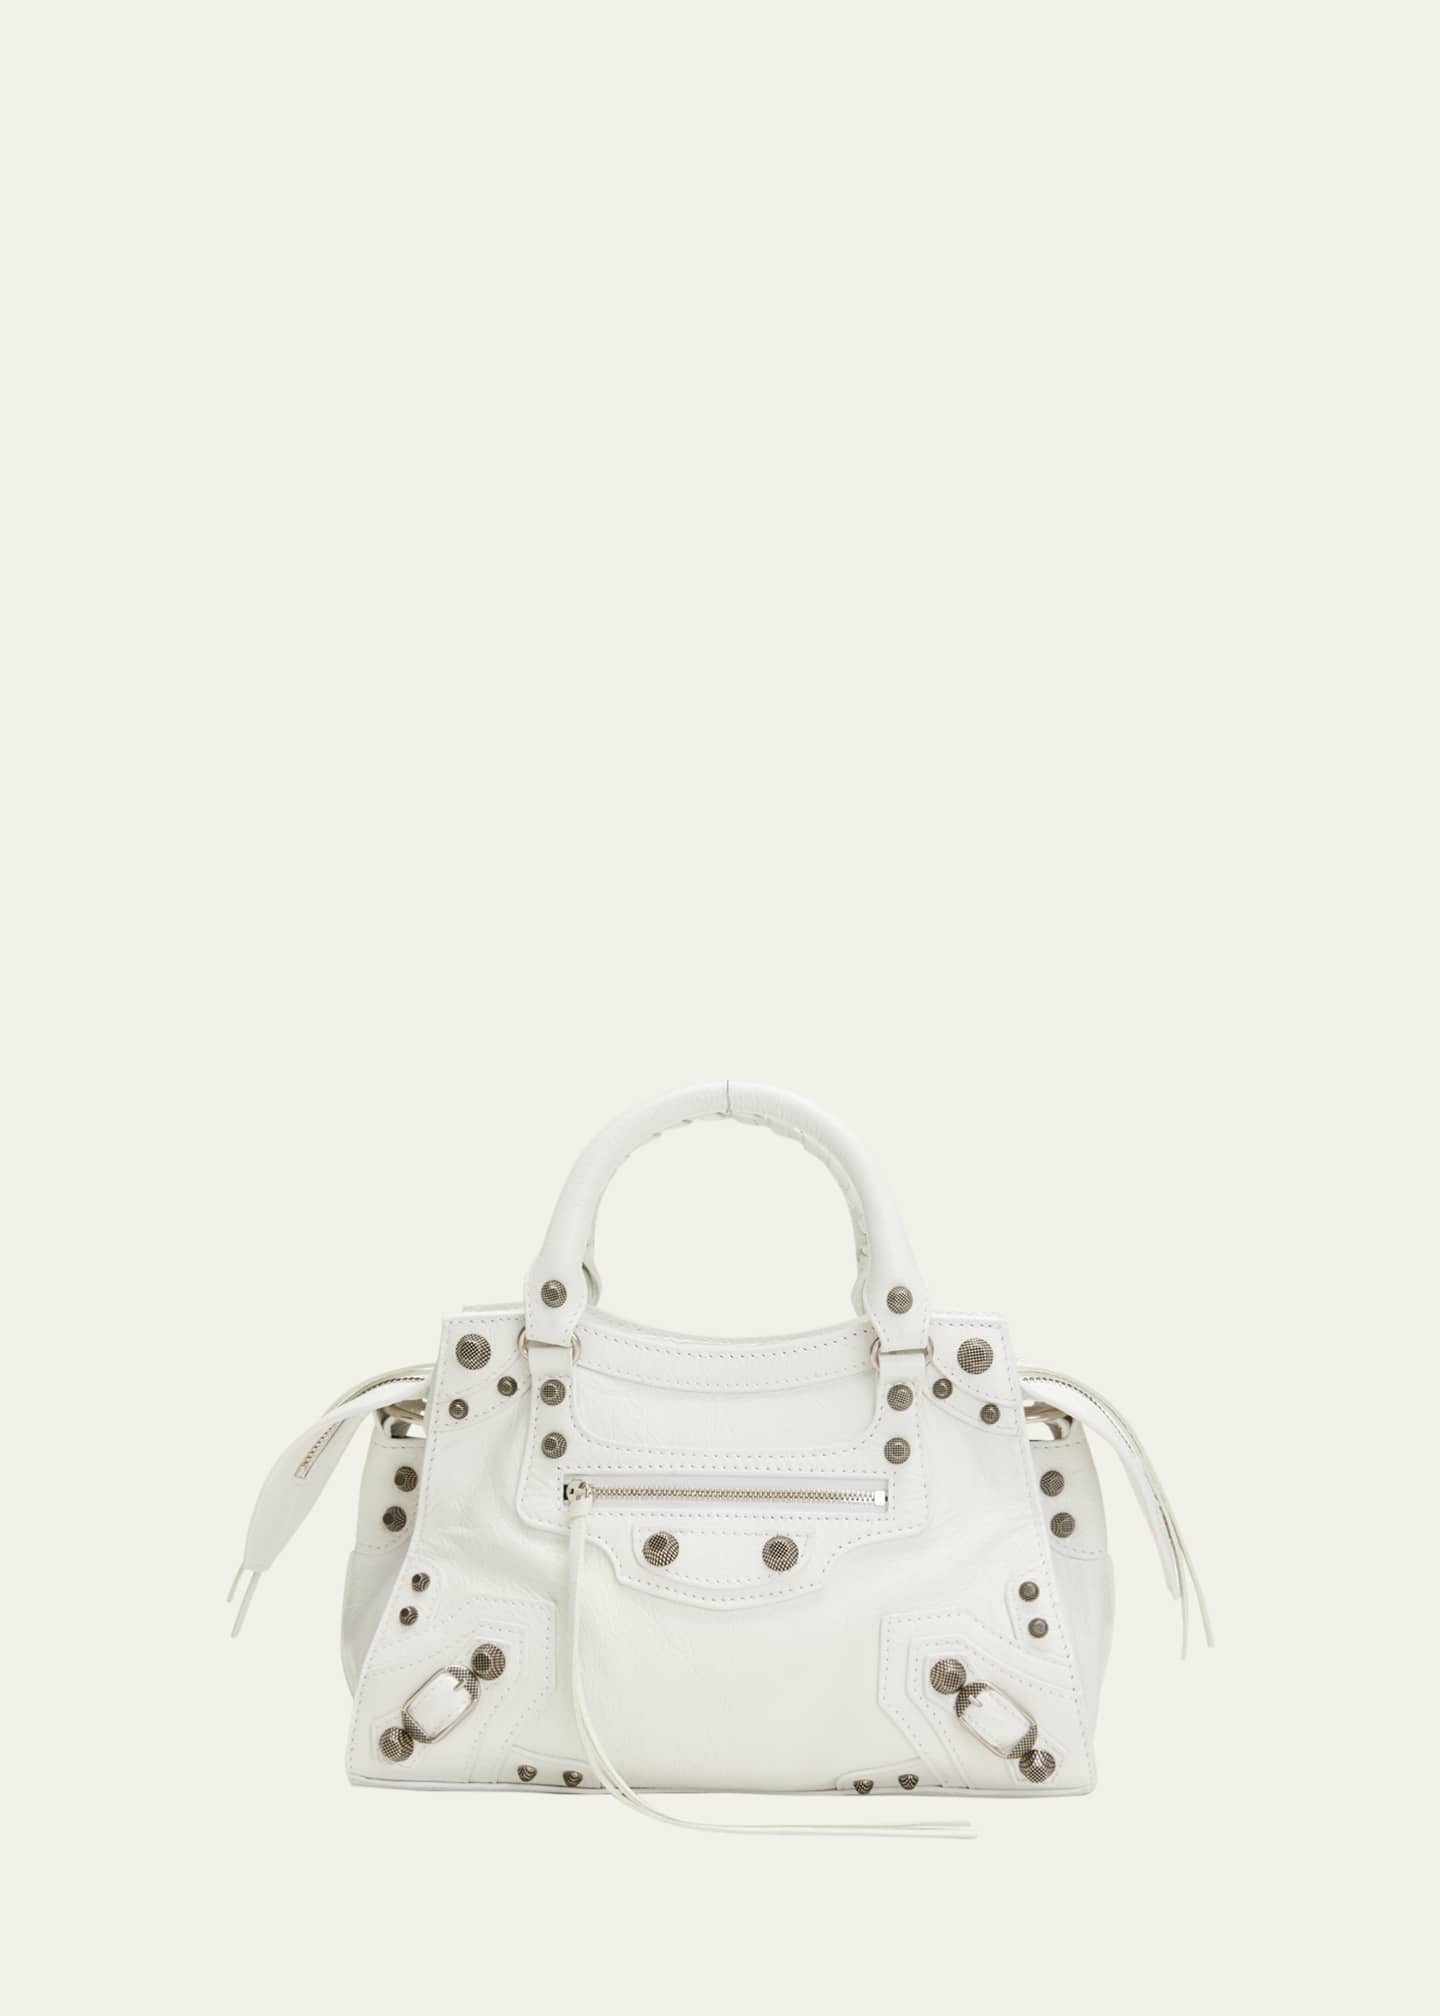 The IT bag you should invest in 2020 Fall – Balenciaga NEO CLASSIC